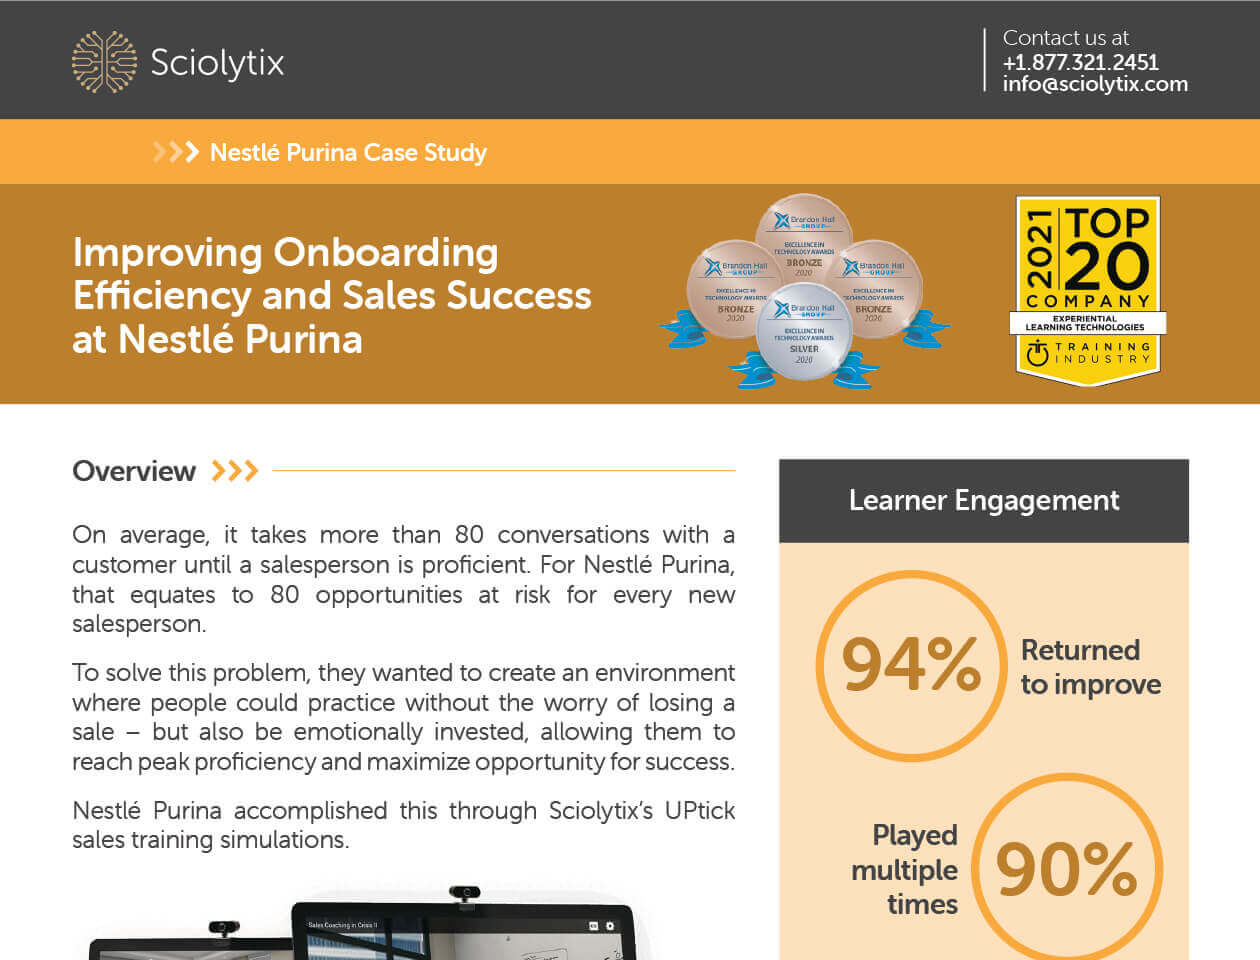 Improving Onboarding Efficiency and Sales Success at Nestlé Purina